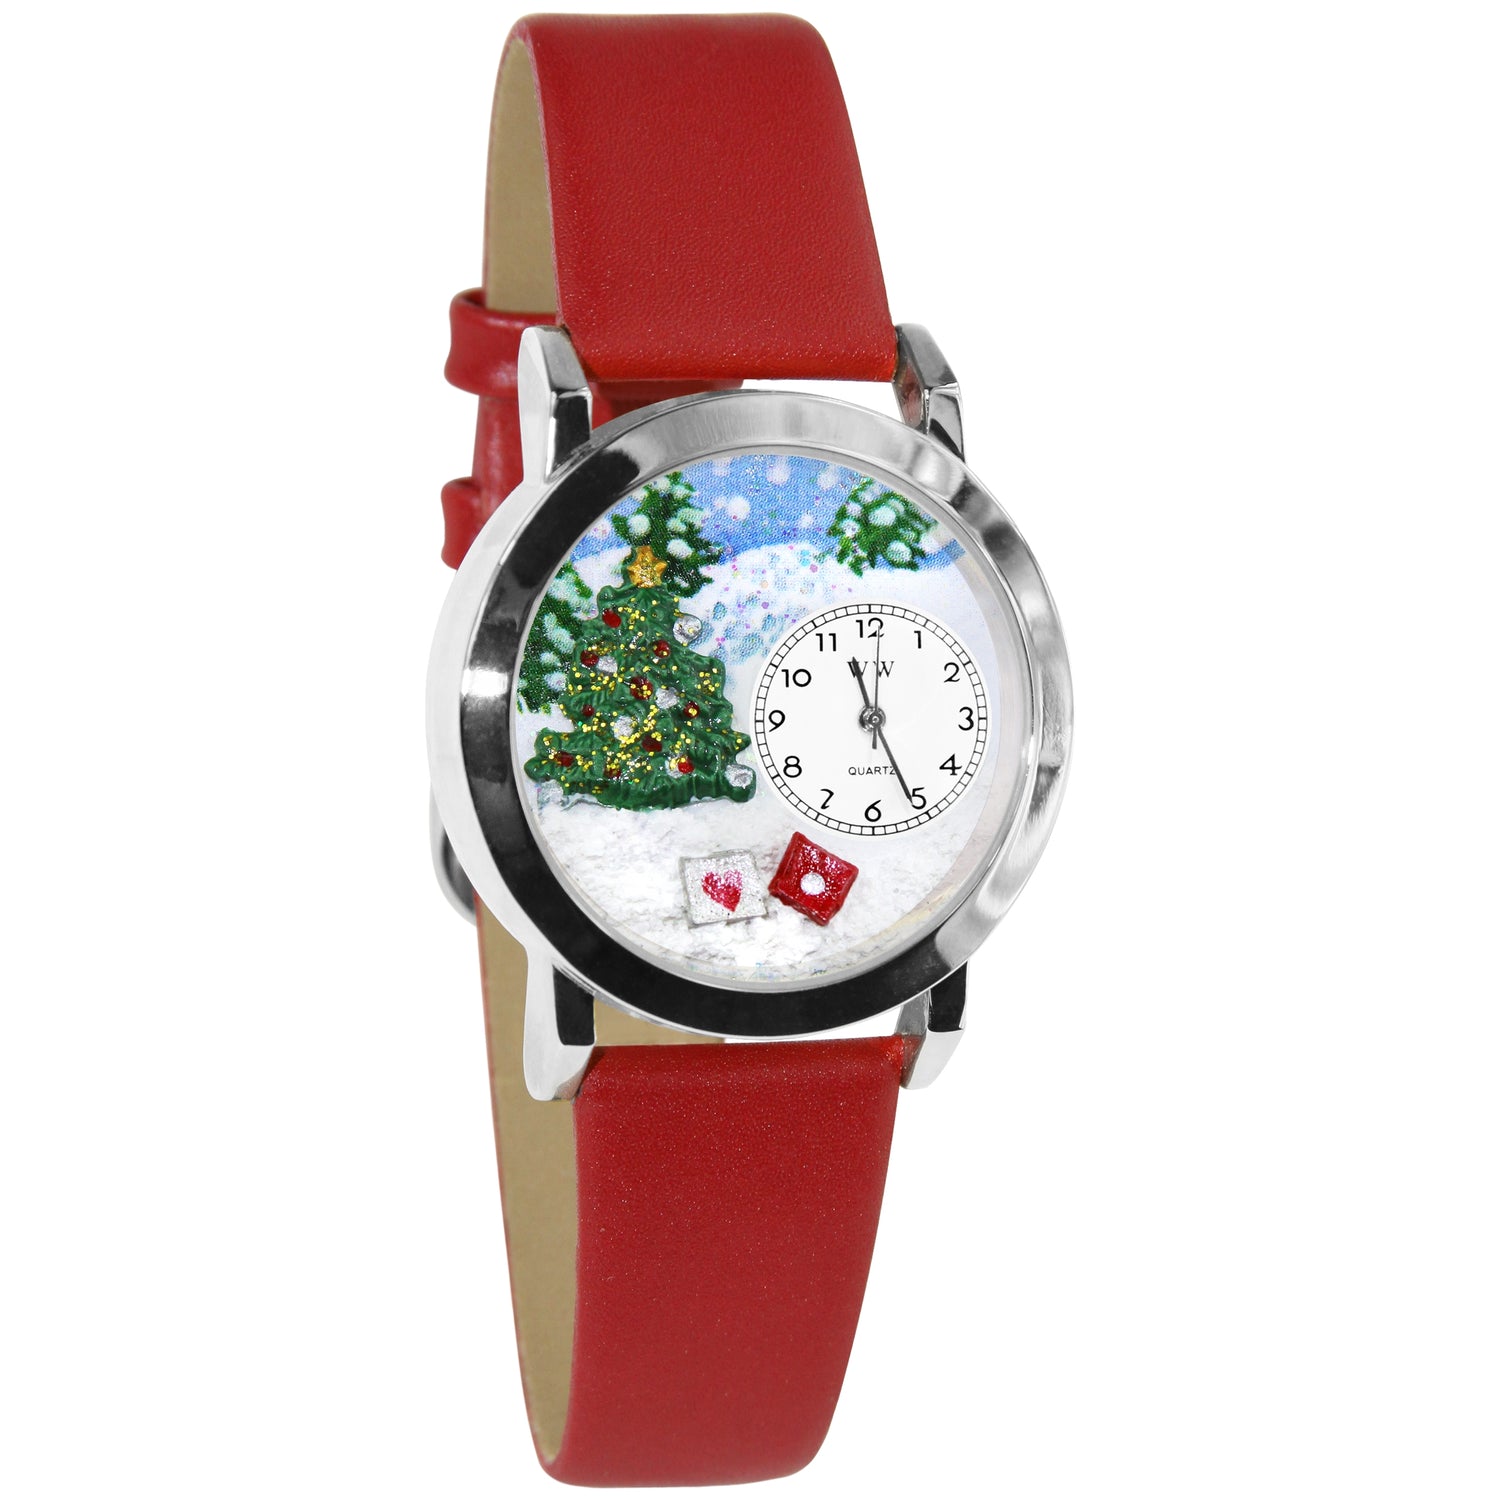 Whimsical Gifts | Christmas Tree 3D Watch Small Style | Handmade in USA | Holiday & Seasonal Themed | Christmas | Novelty Unique Fun Miniatures Gift | Silver Finish Red Leather Watch Band